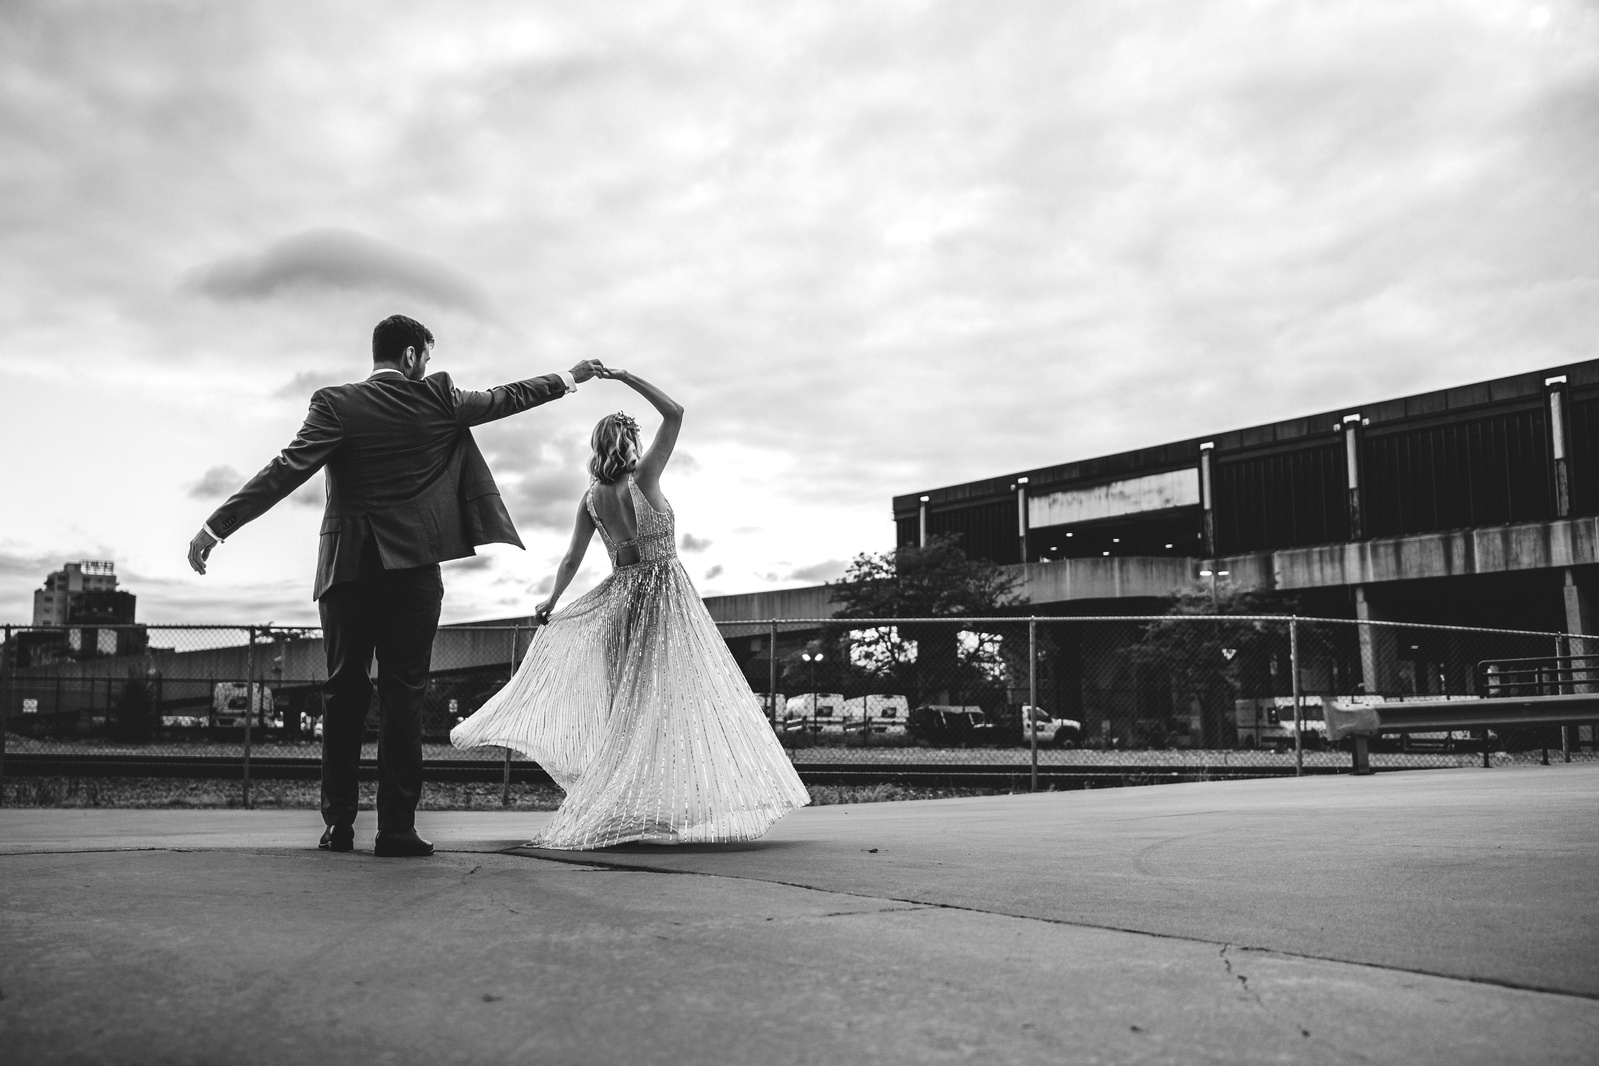 black and white photograph of couple dancing outside under a cloudy sky during their wedding.  Urban environment, with parking structure as the backdrop to groom twirling the bride in epic fashion.